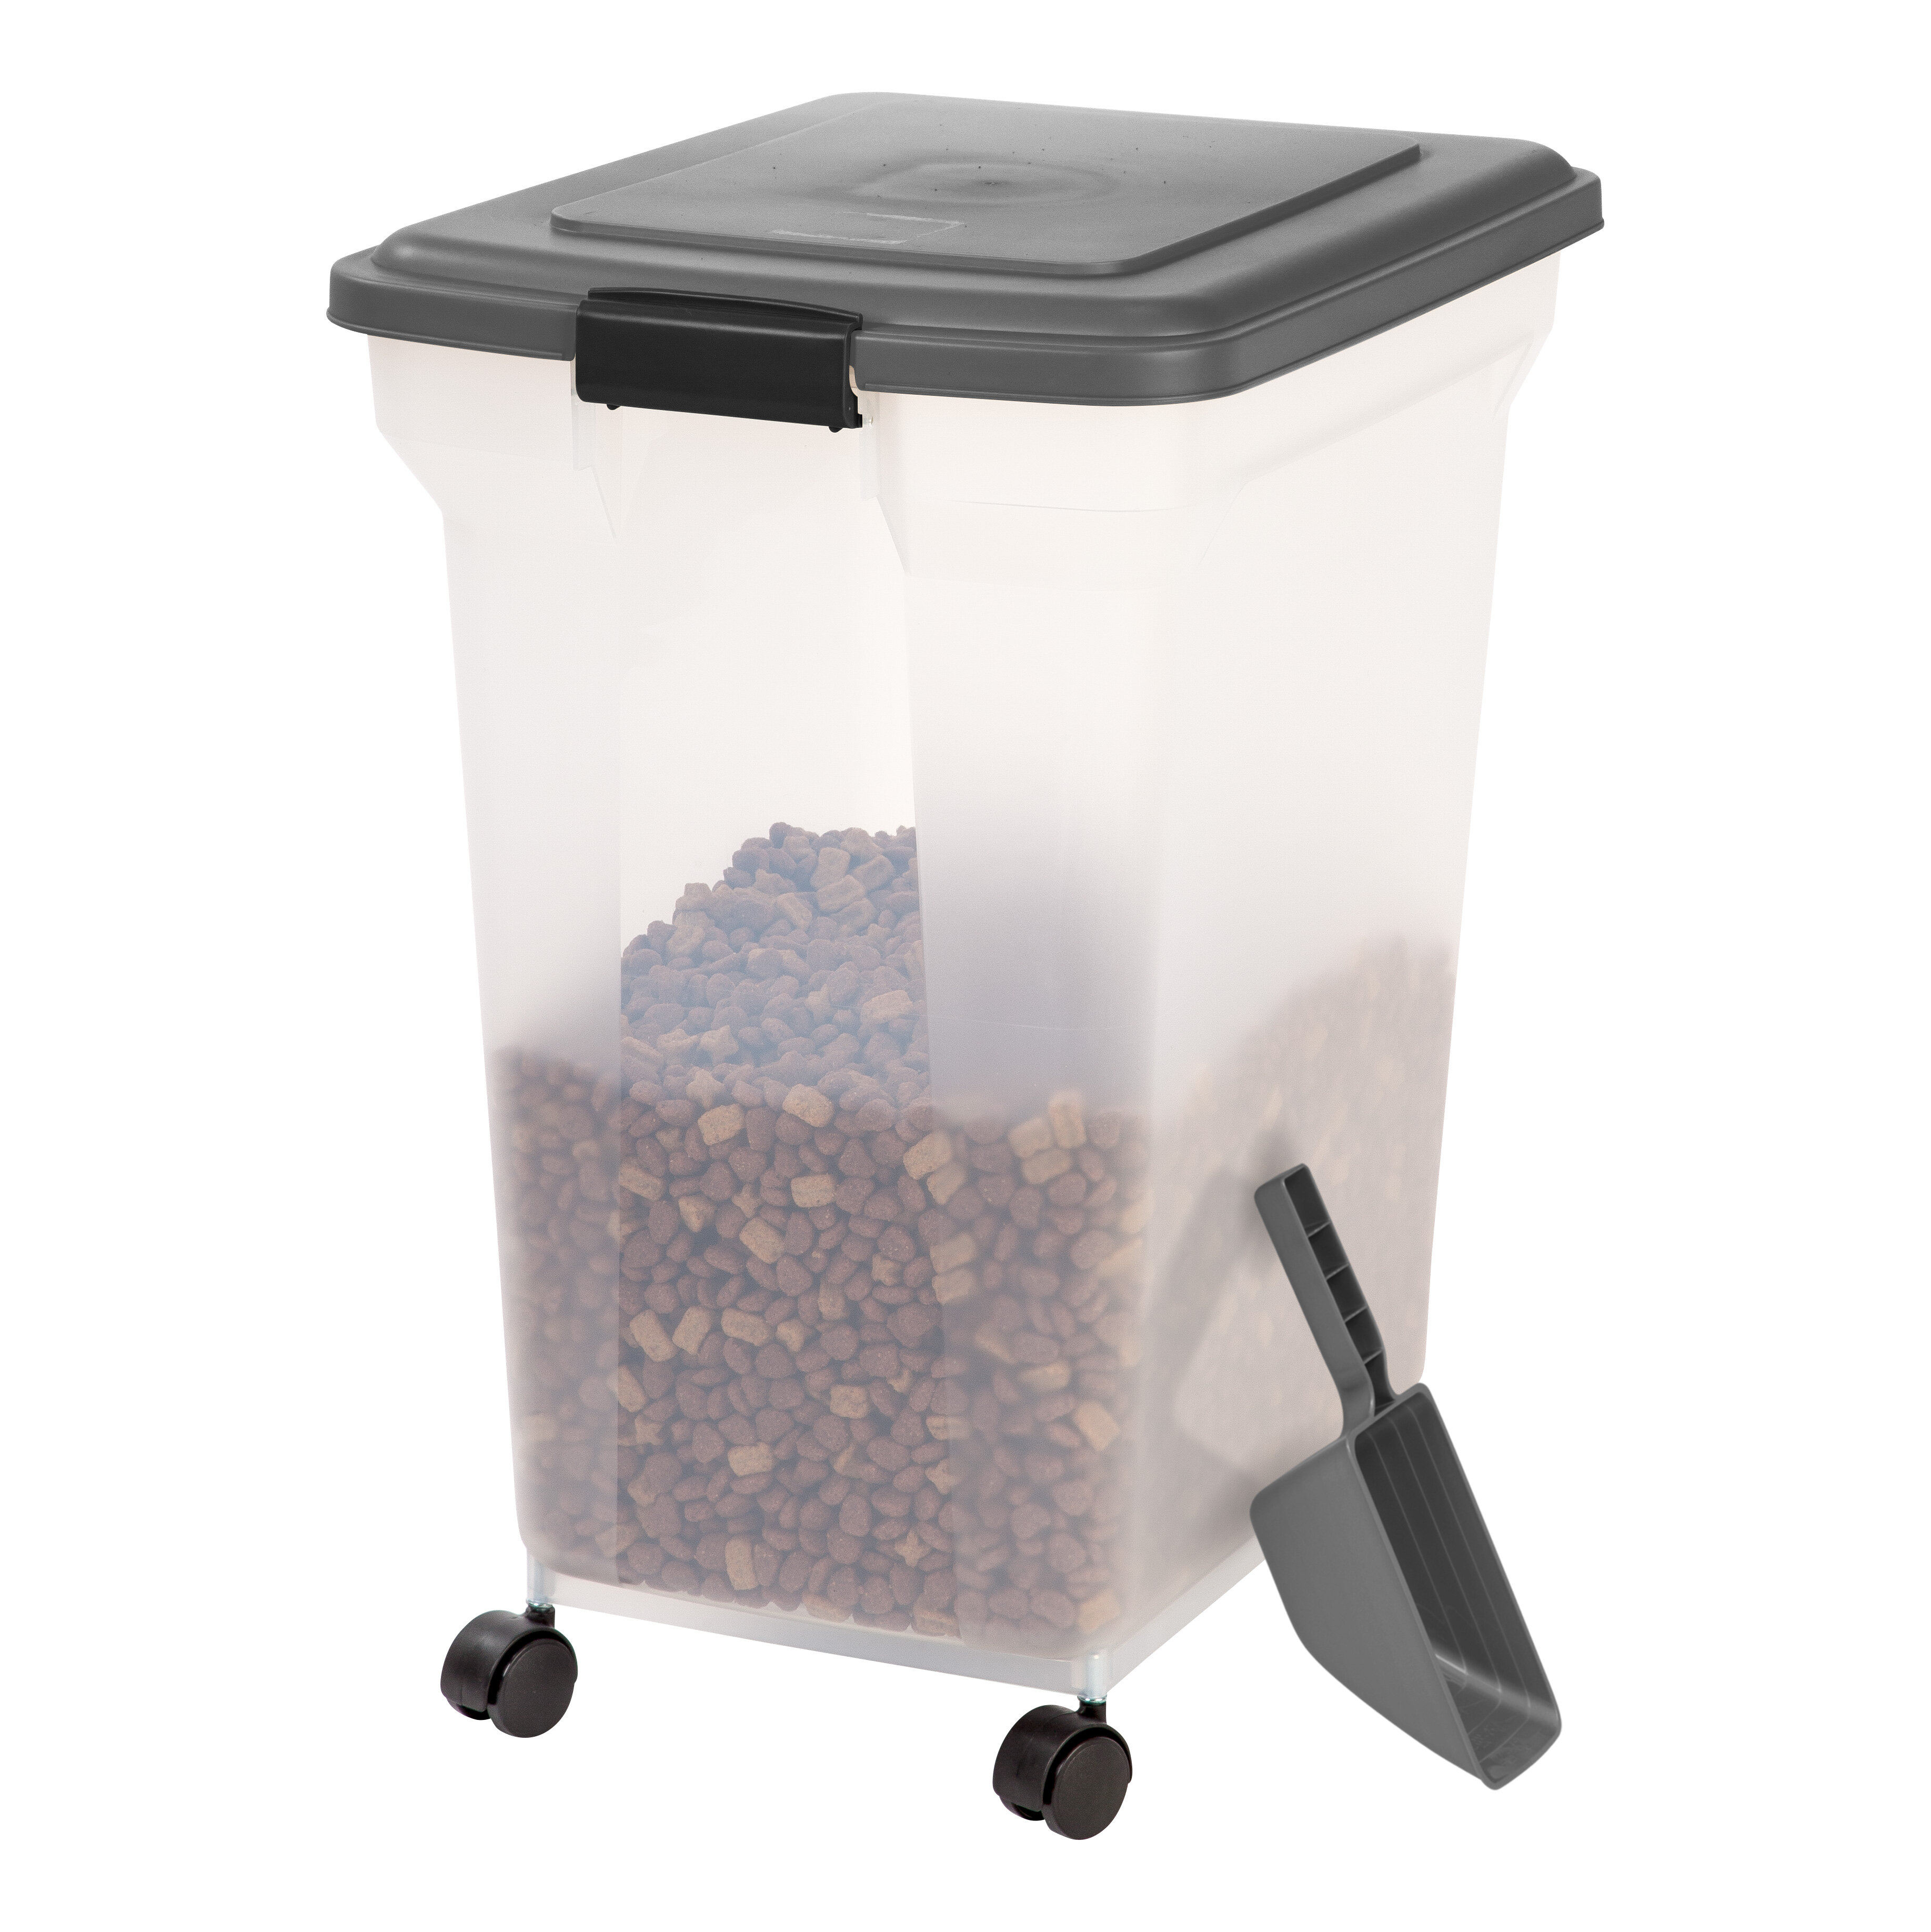 Aspen Large White Canister with Scoop + Reviews